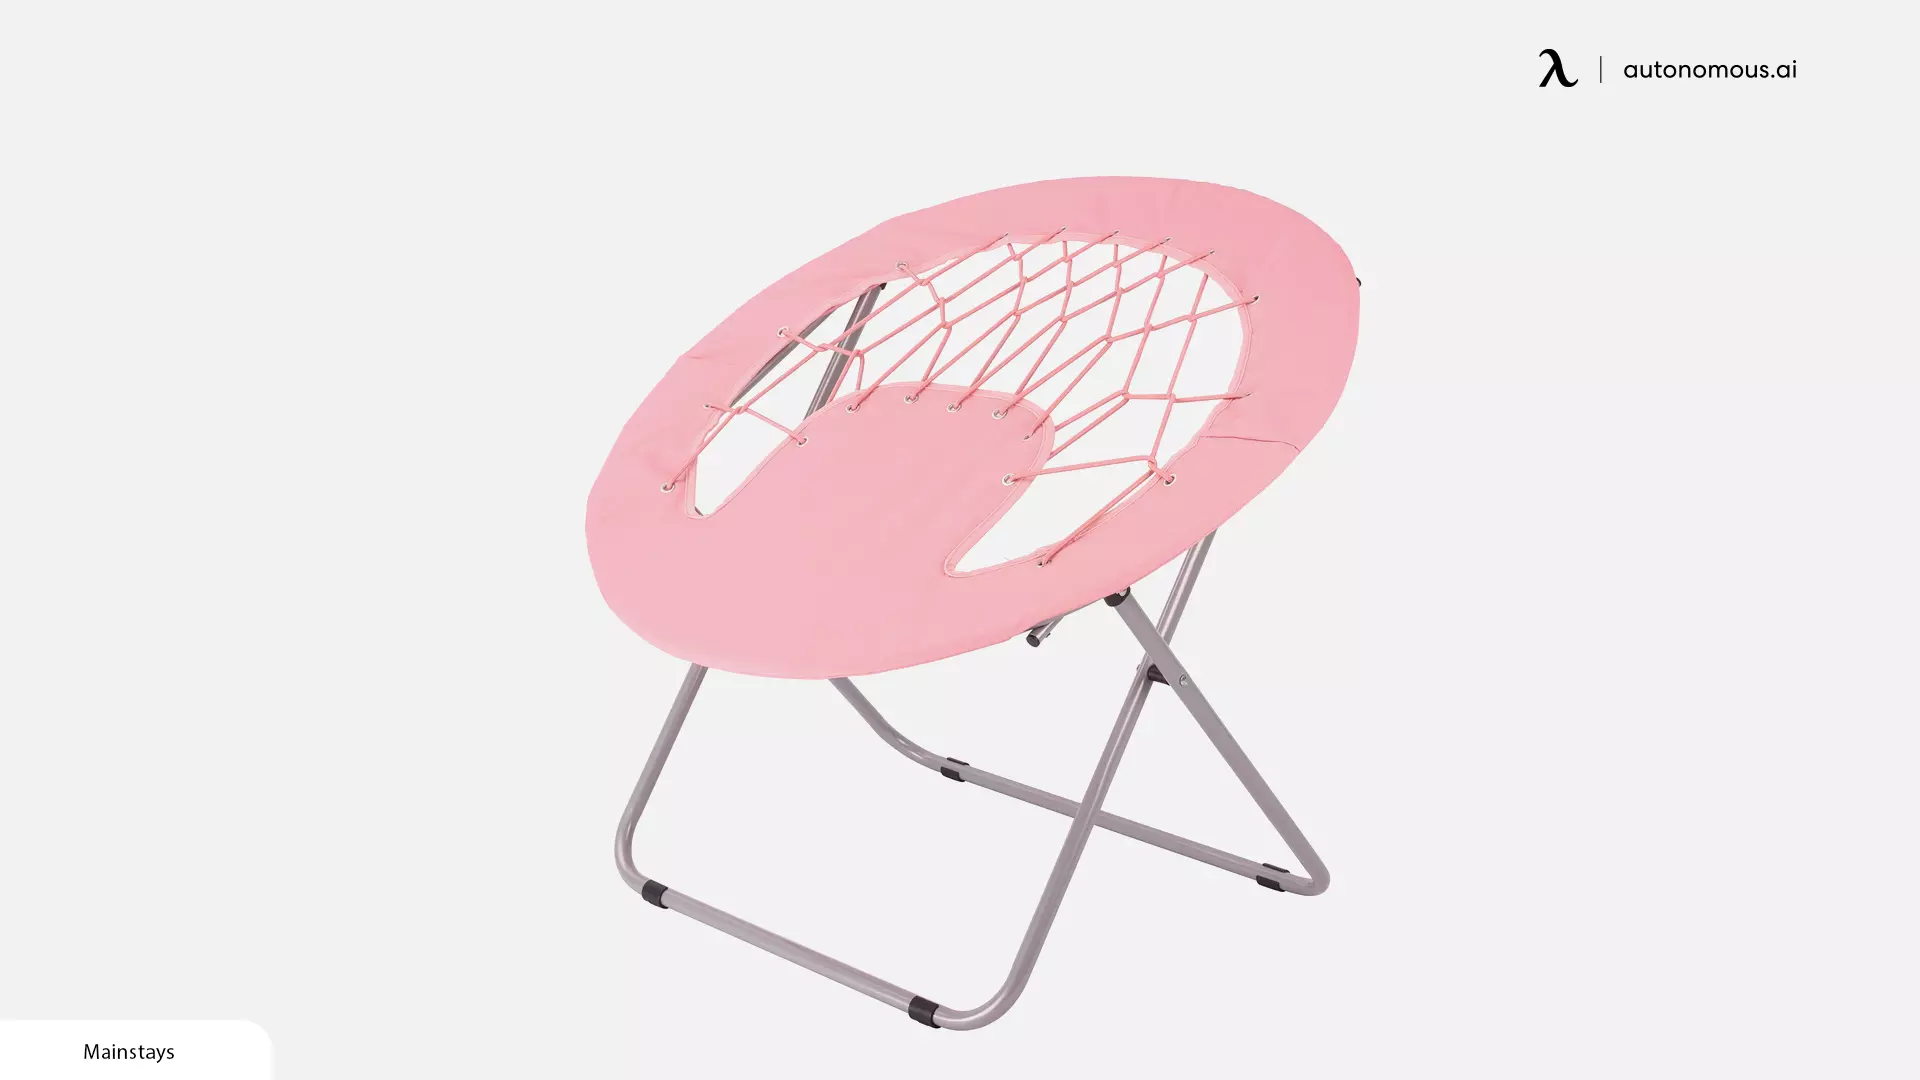 Mainstays Pink Bungee Chair